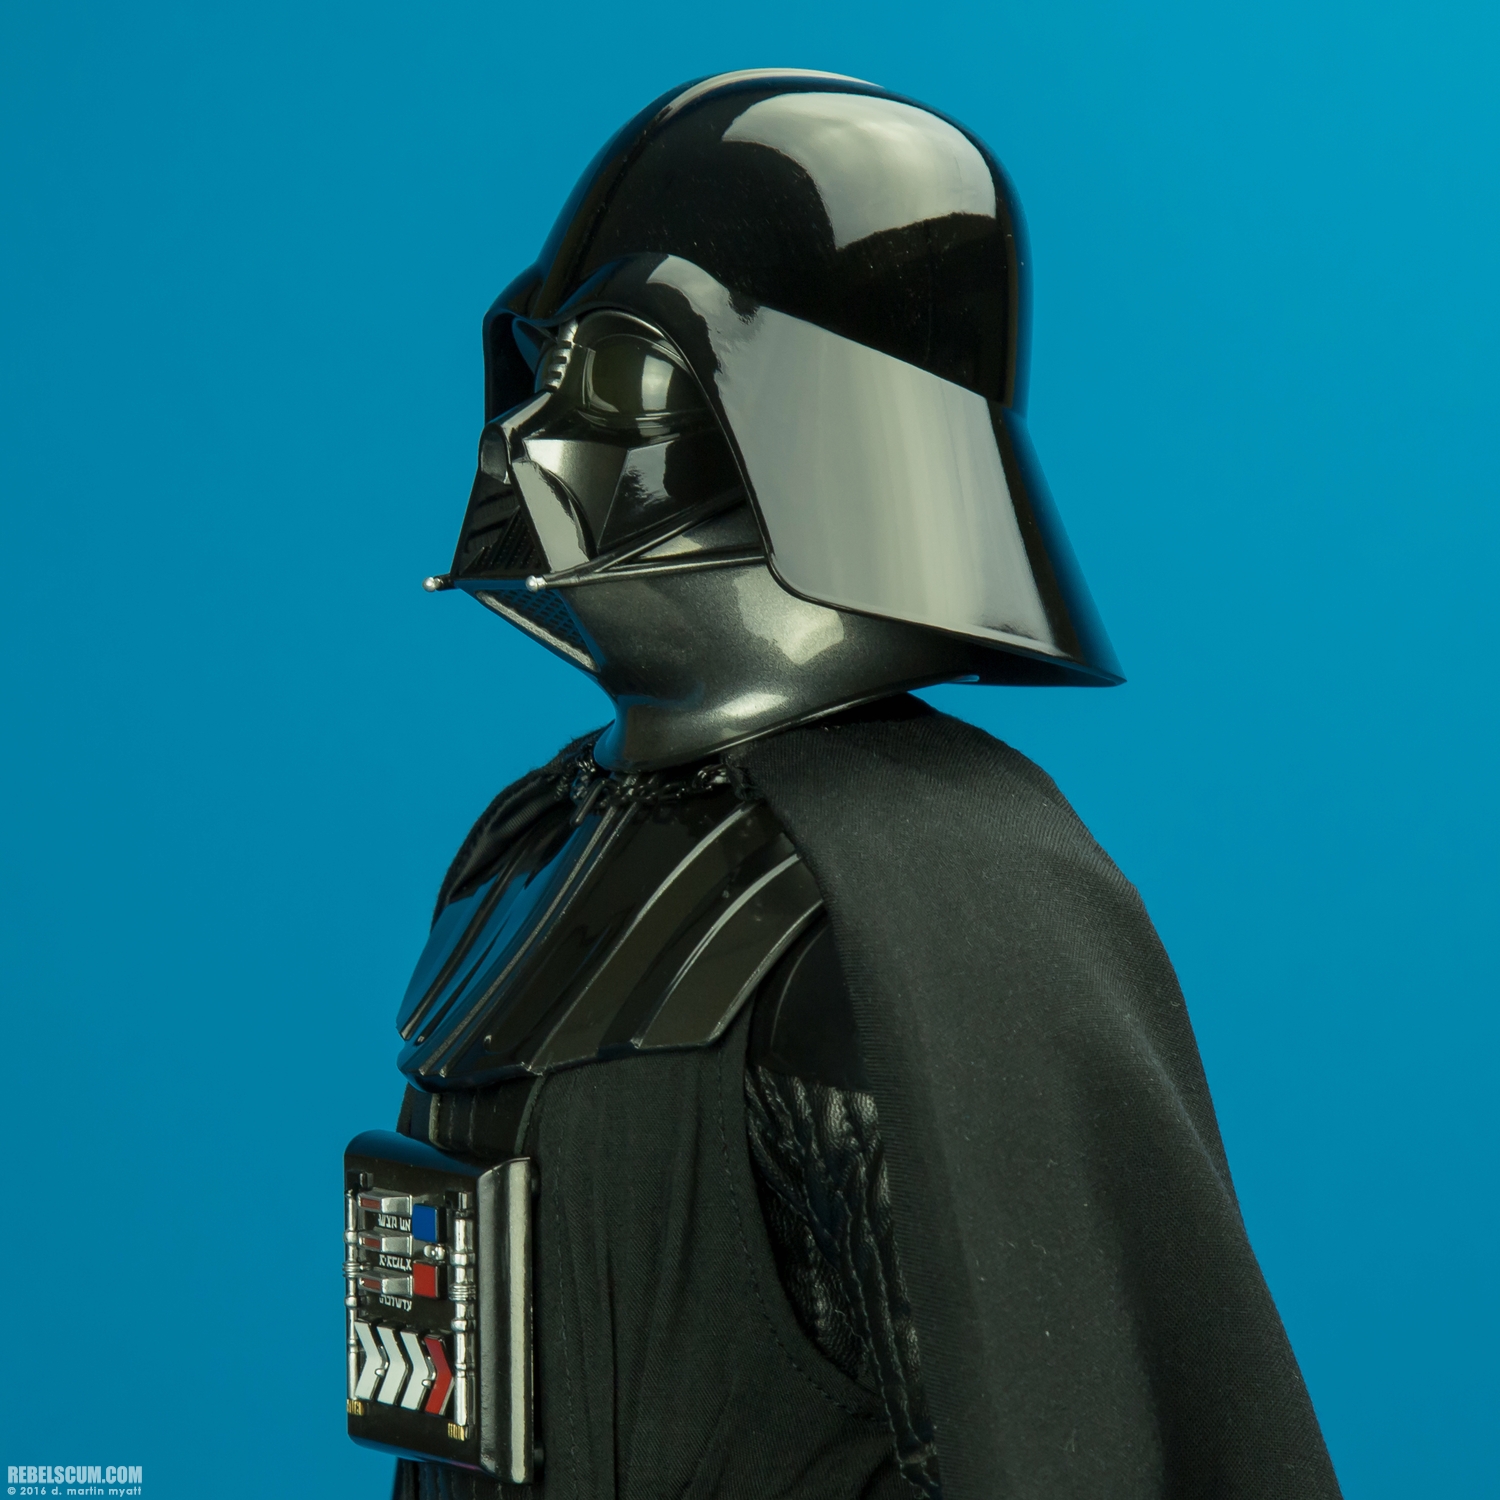 Darth-Vader-Lord-of-the-Sith-Premium-Format-Figure-Sideshow-007.jpg